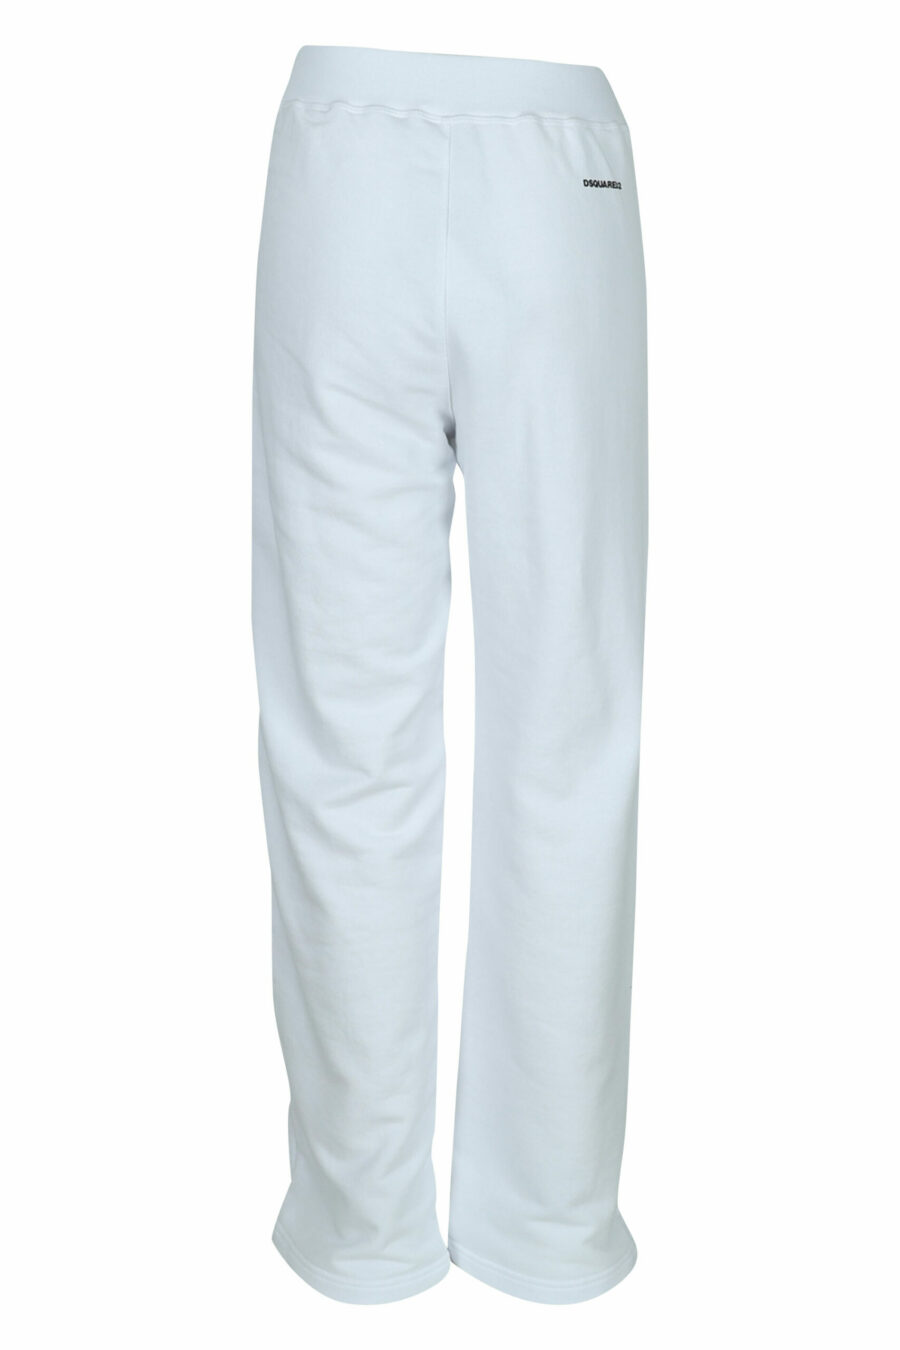 Wide white trousers with logo - 8054148457884 1 scaled